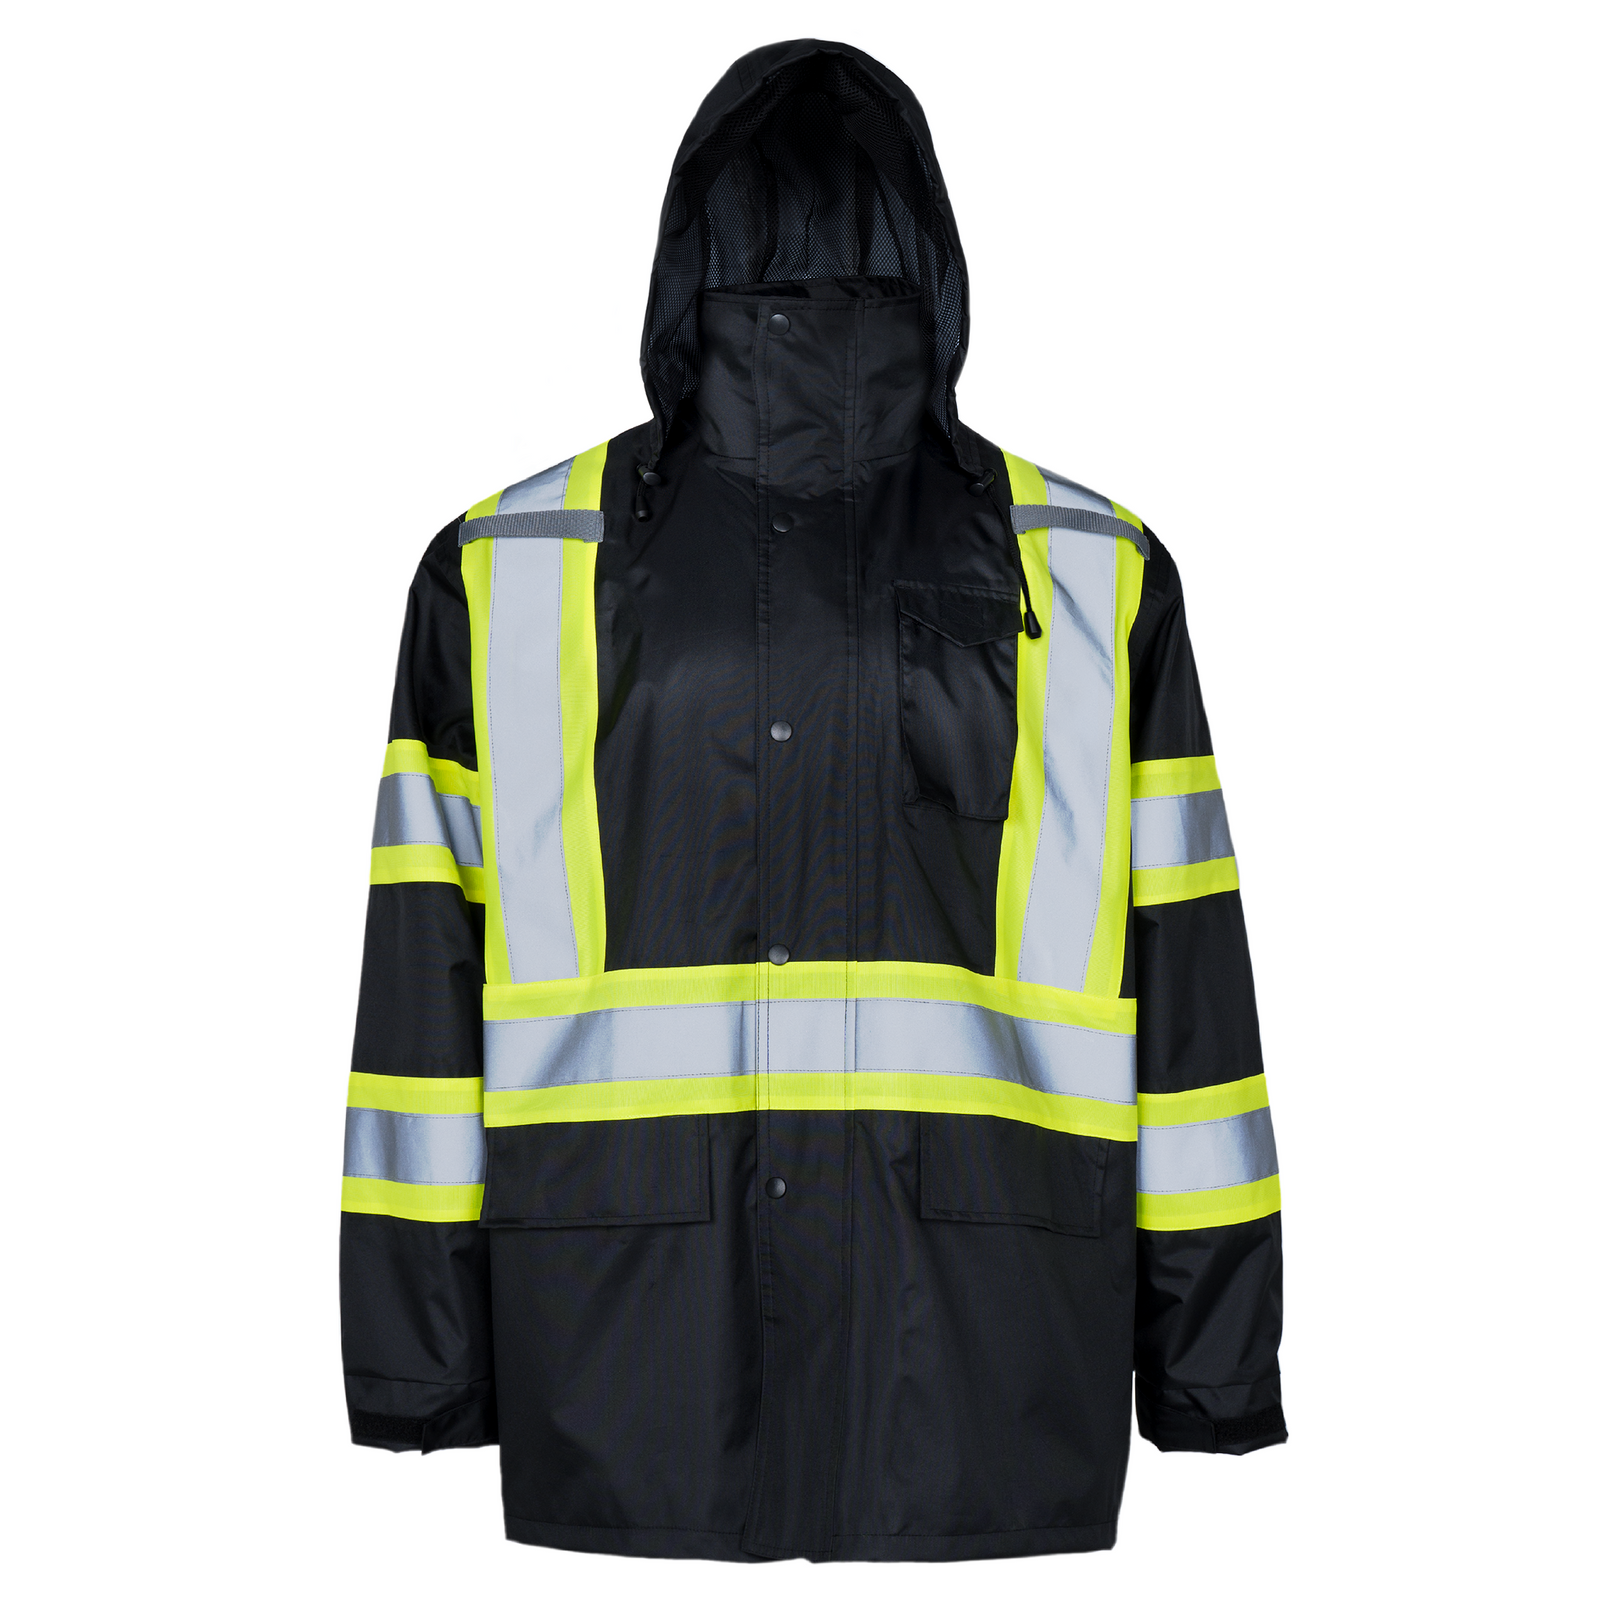 Black safety rain jacket with reflective stripes for outdoor work